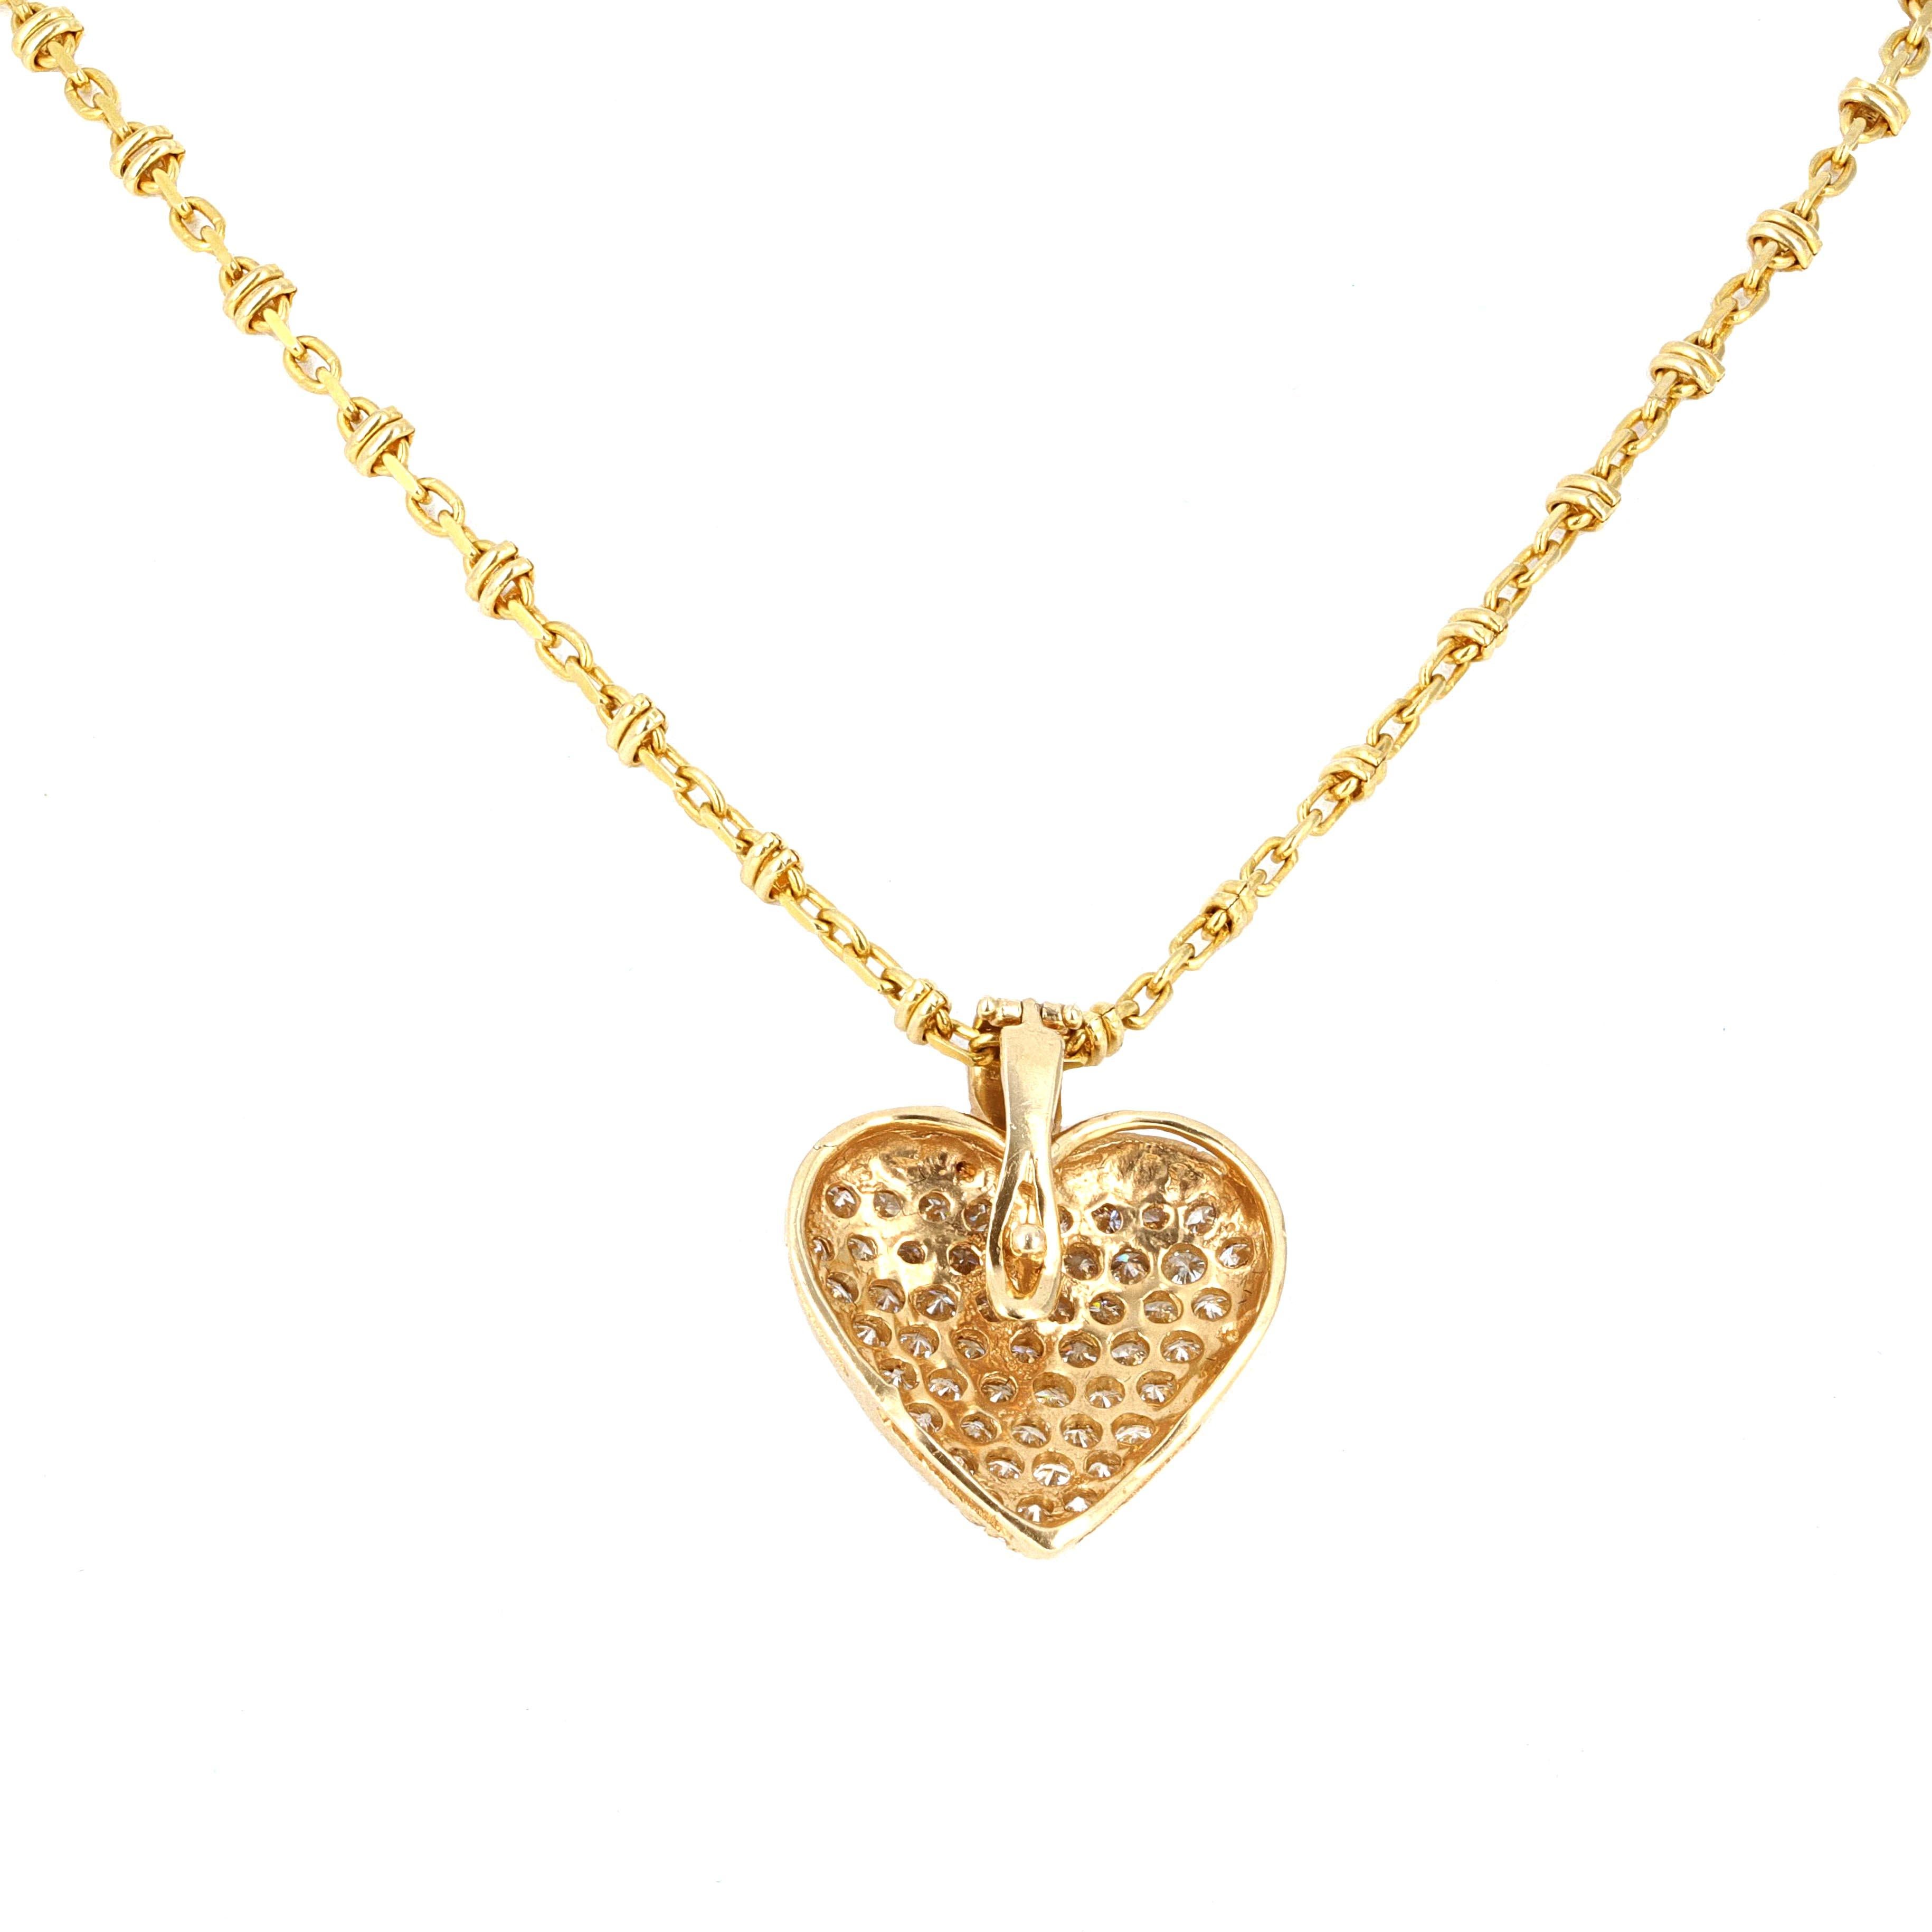 14 karat yellow gold pave diamond heart pendant on an 18 inch chain. The heart has 1.25 carats total weigh of white round brilliant diamonds. The pendant is detachable.